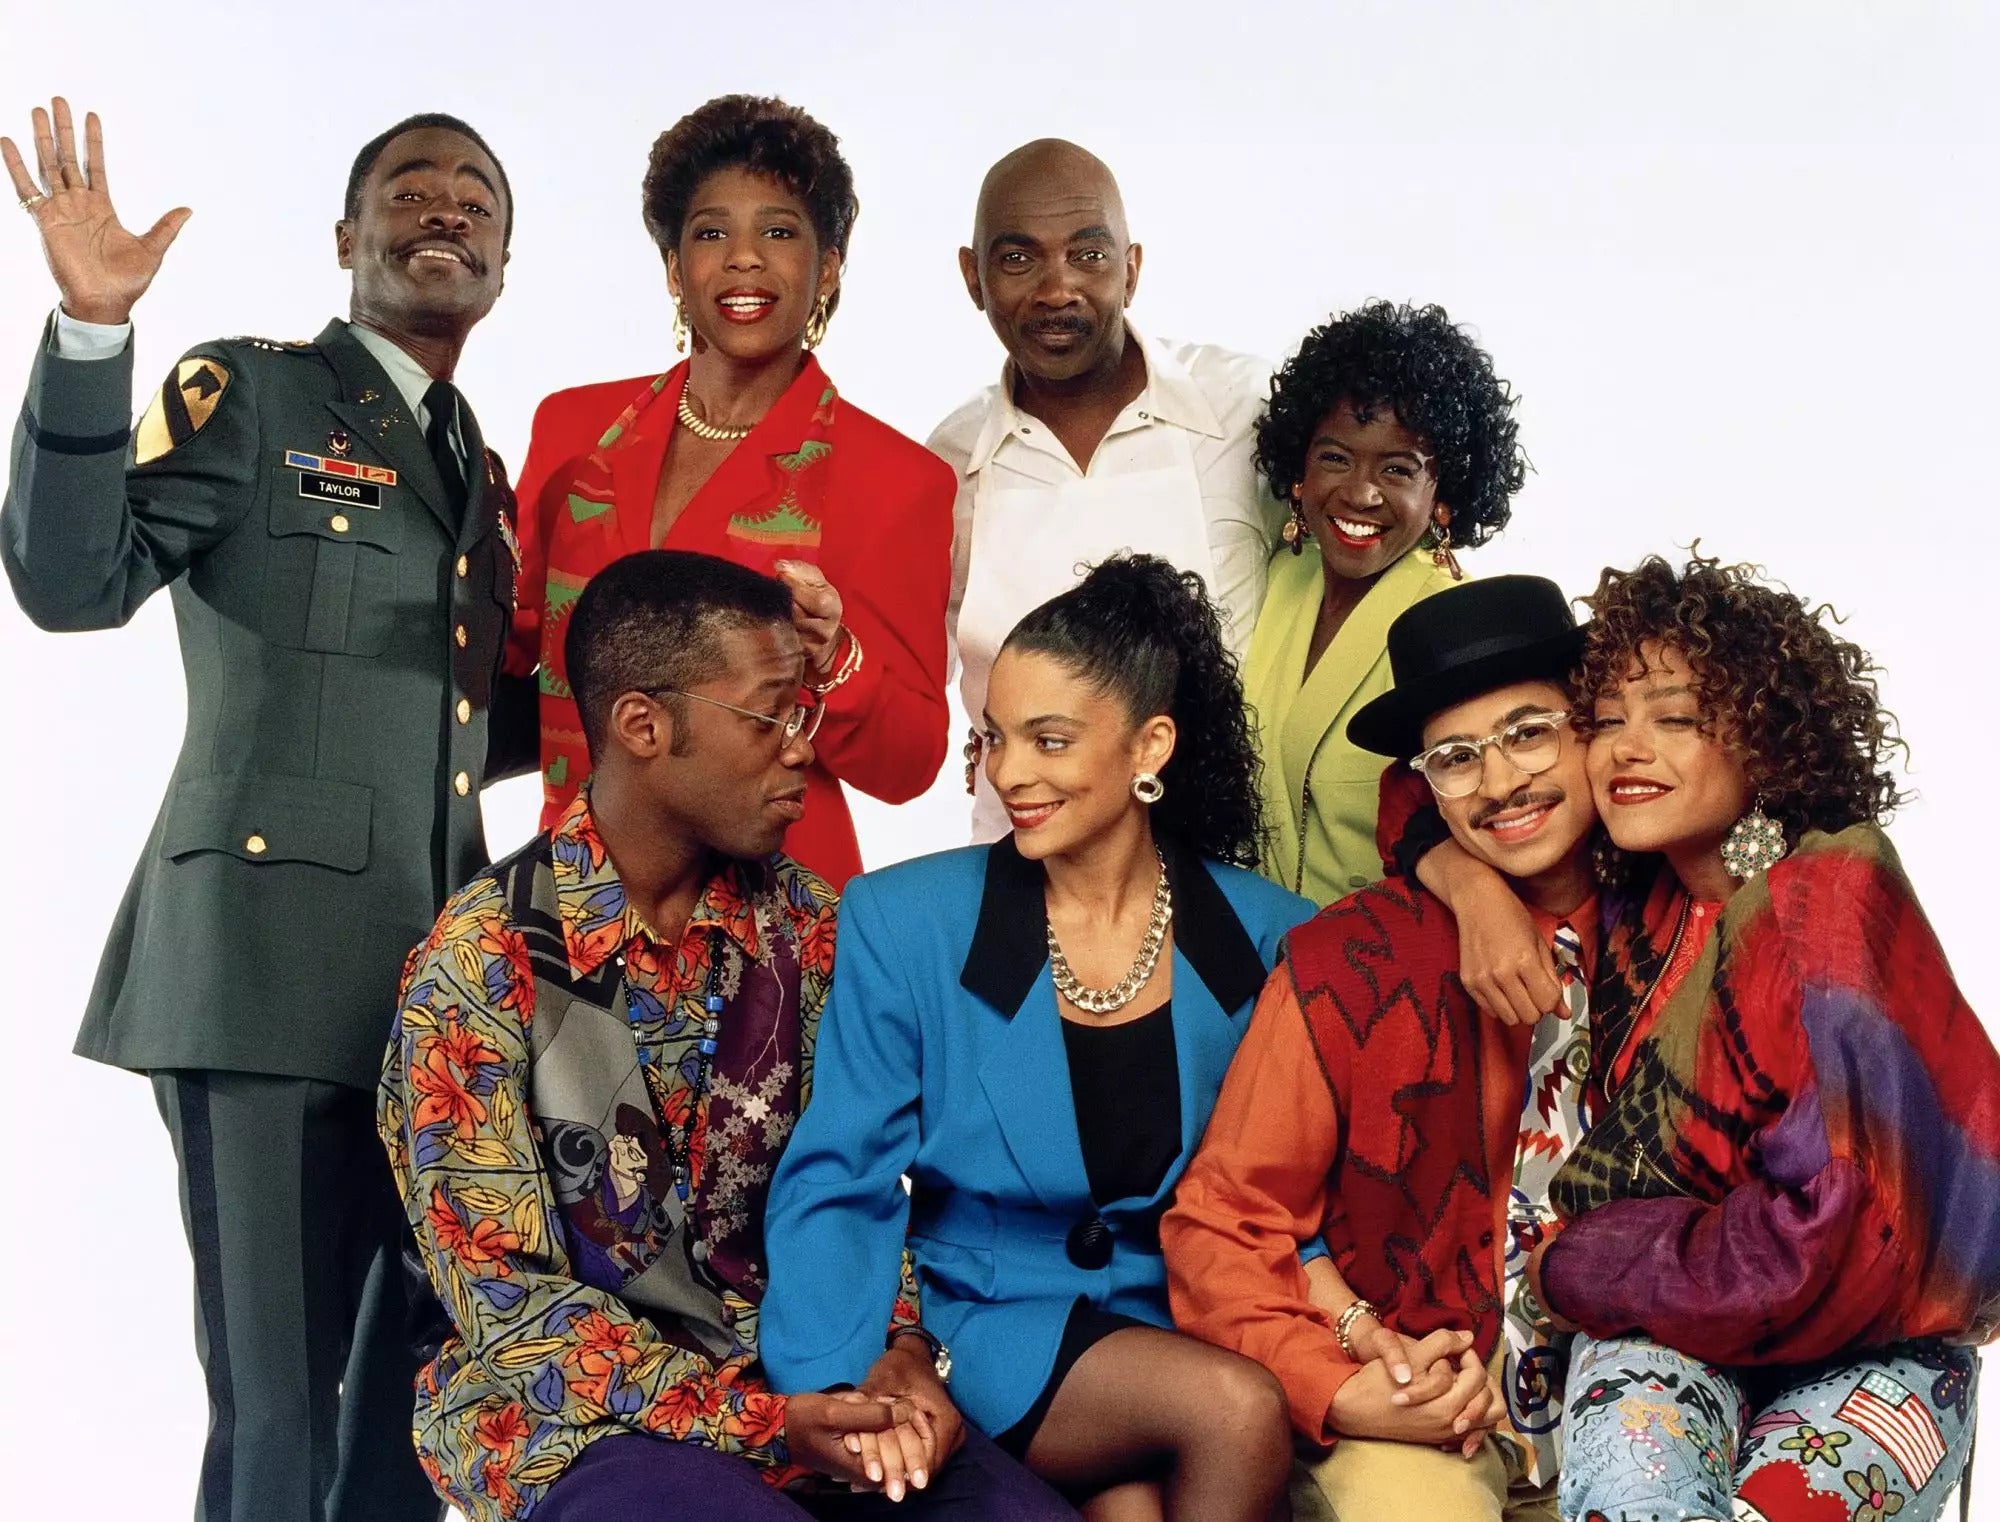 A Look At How ‘A Different World’ Shaped Zillennial Career Paths